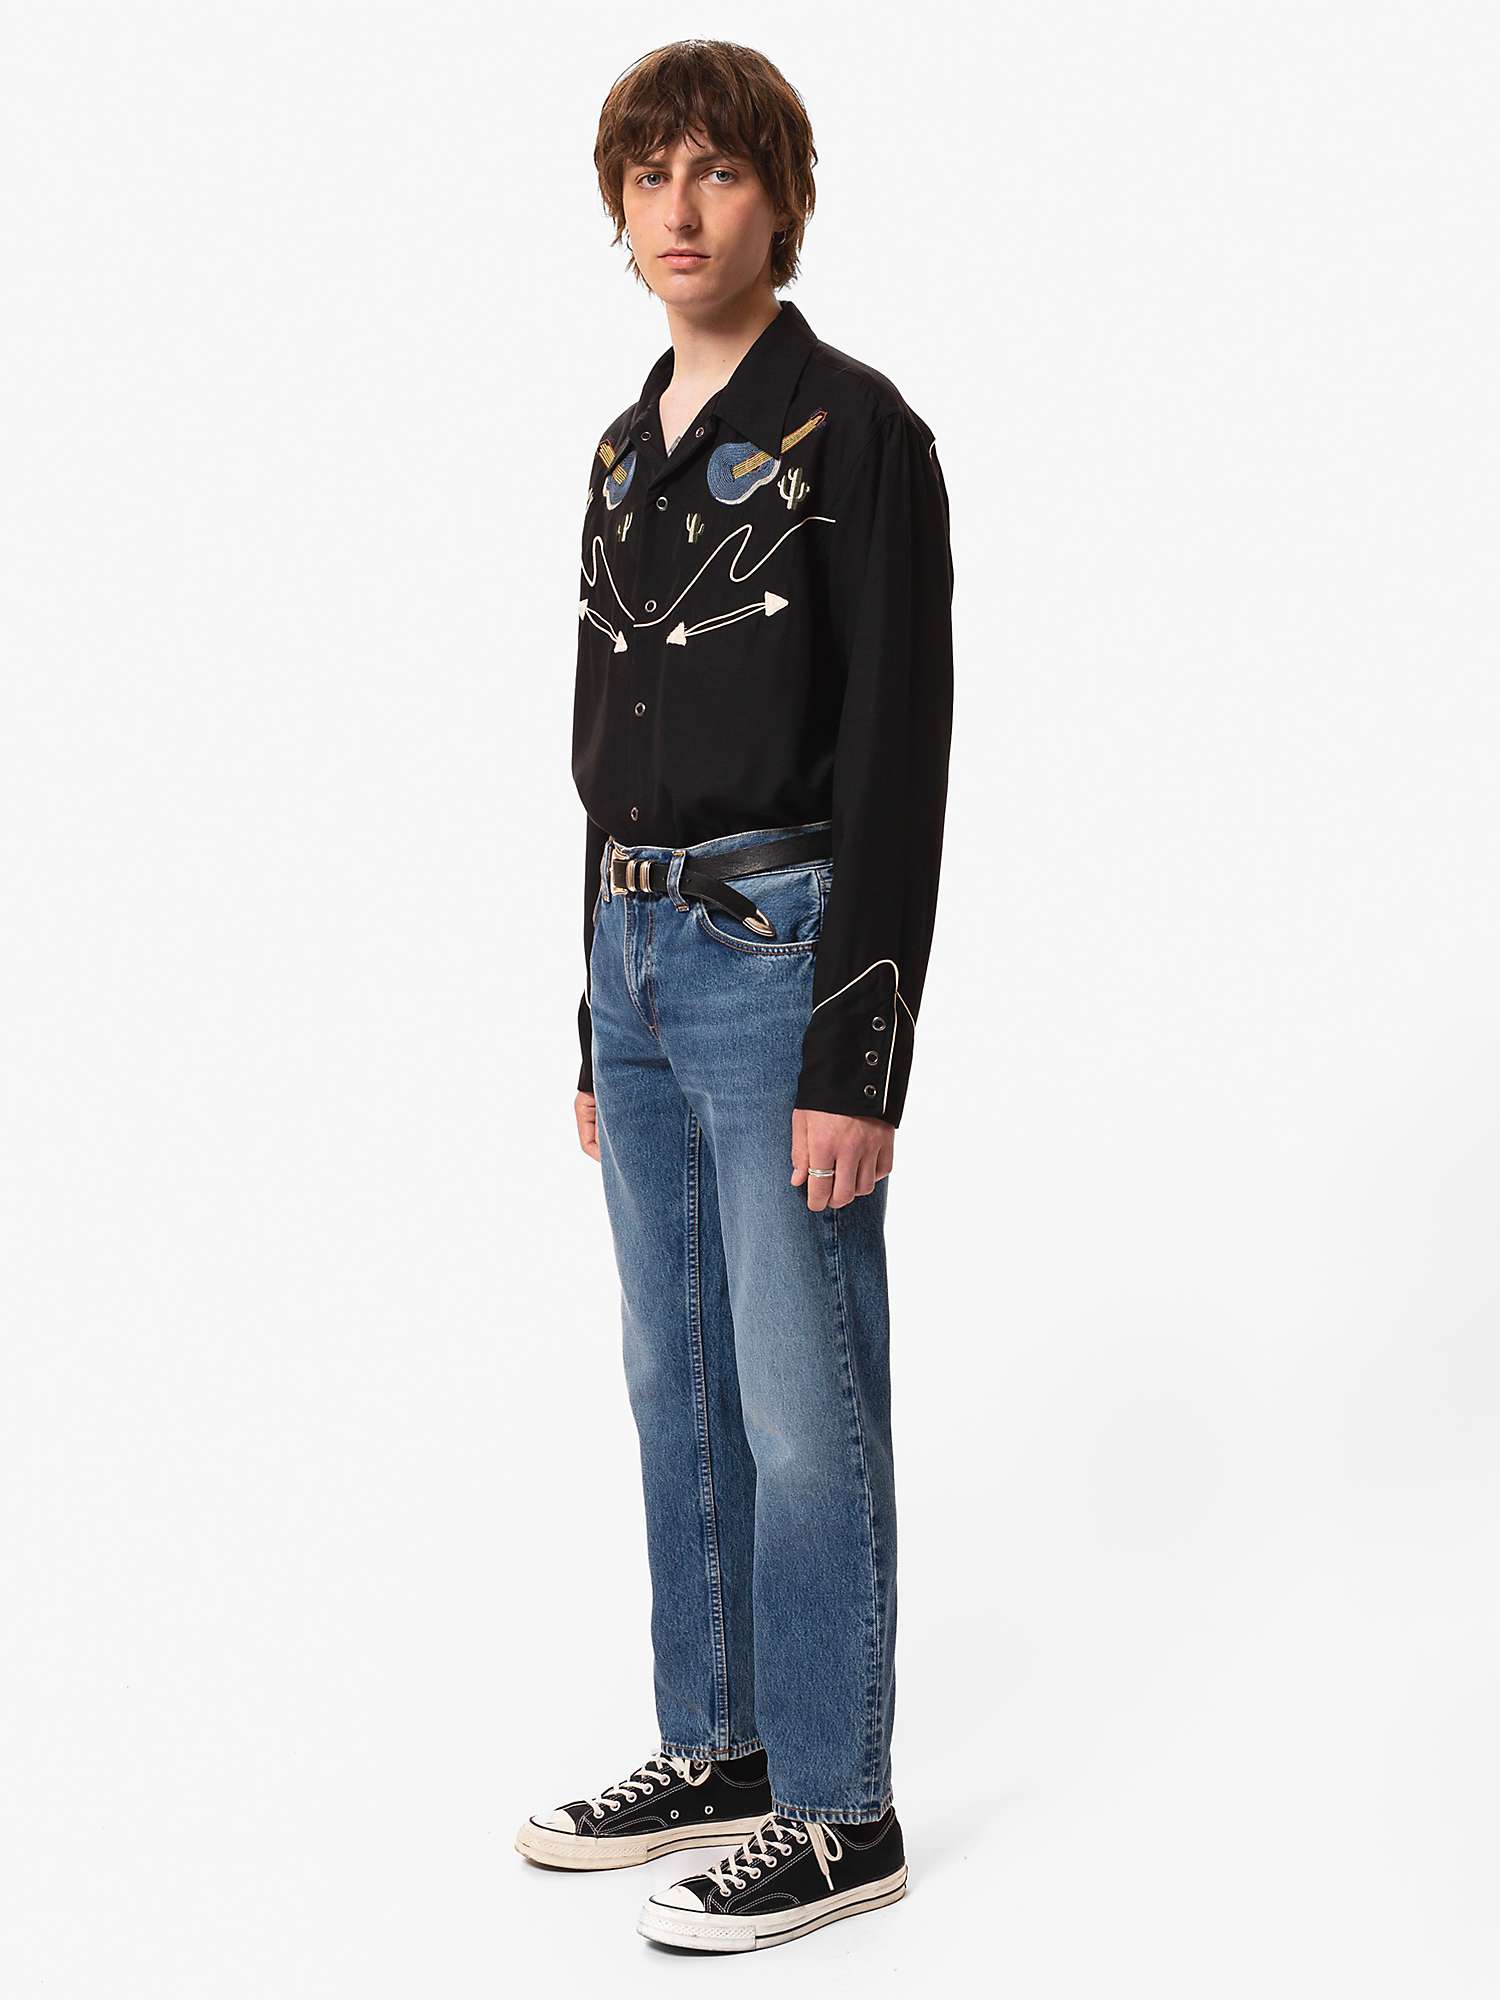 Buy Nudie Jeans Gritty Jackson Regular Fit Jeans, Blue Online at johnlewis.com